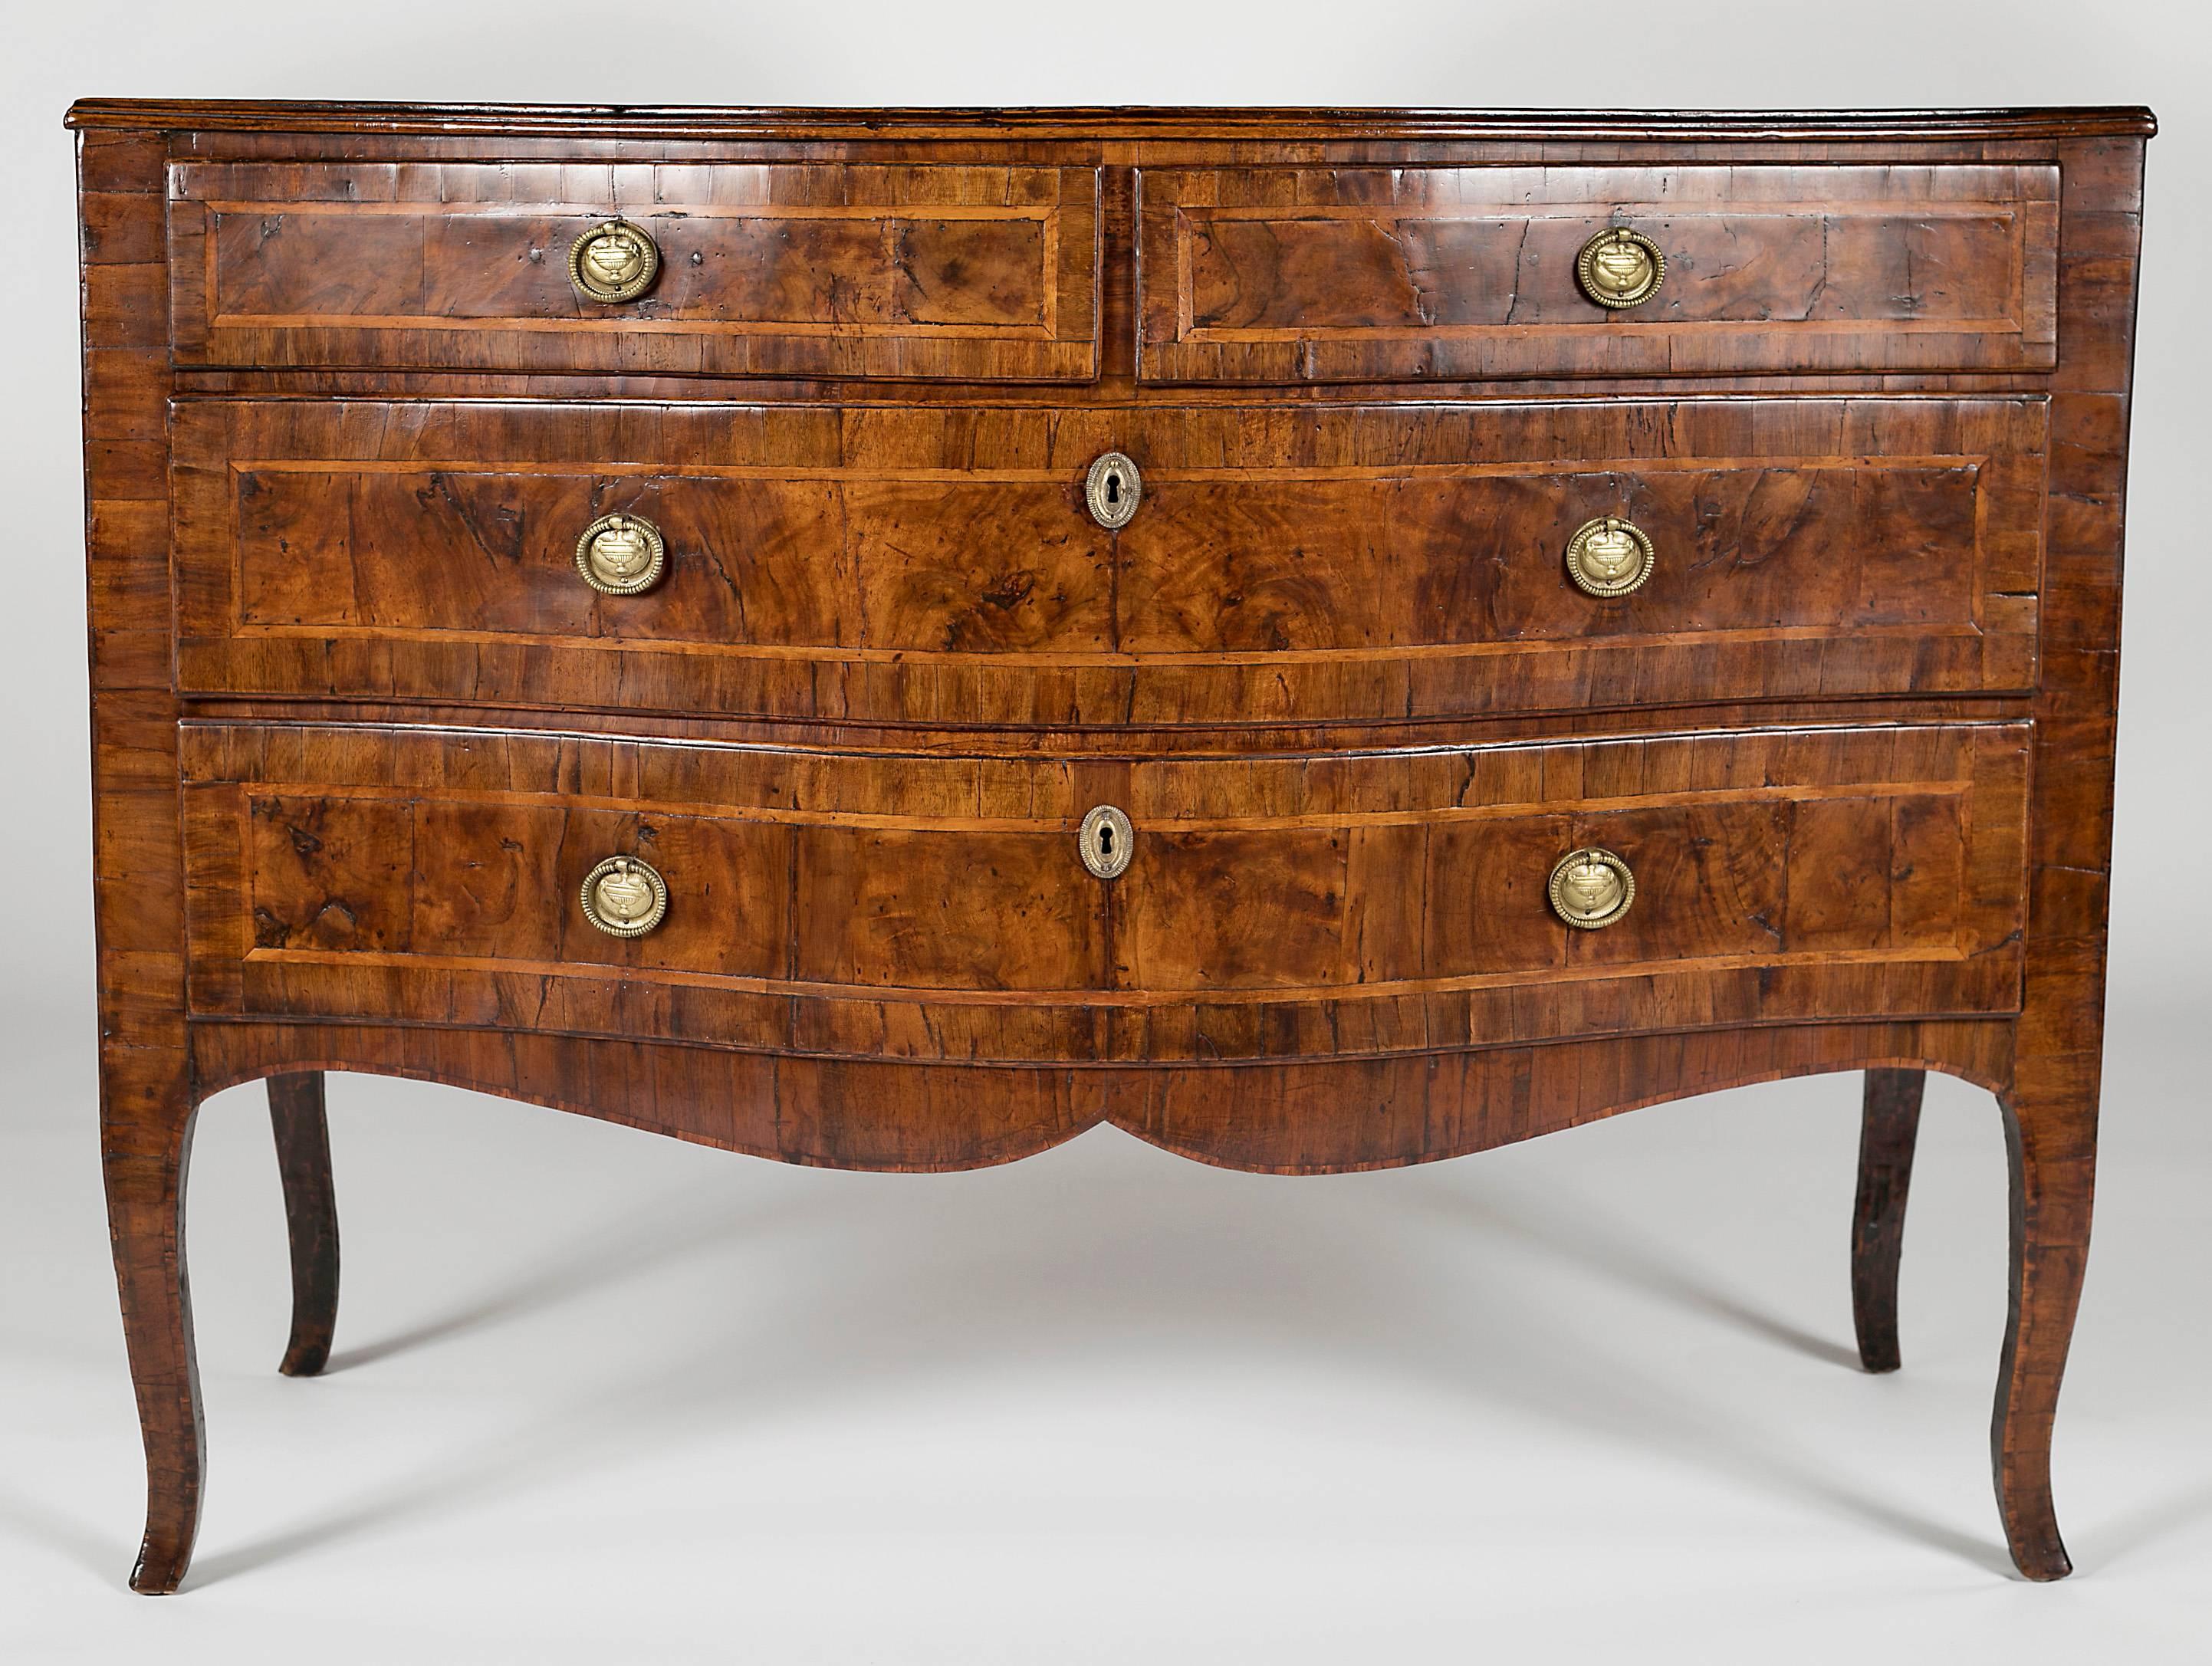 With a serpentine top with crossbanded edge over two drawers over two long drawers raised on cabriole legs. All with brass ring handles with back plates.